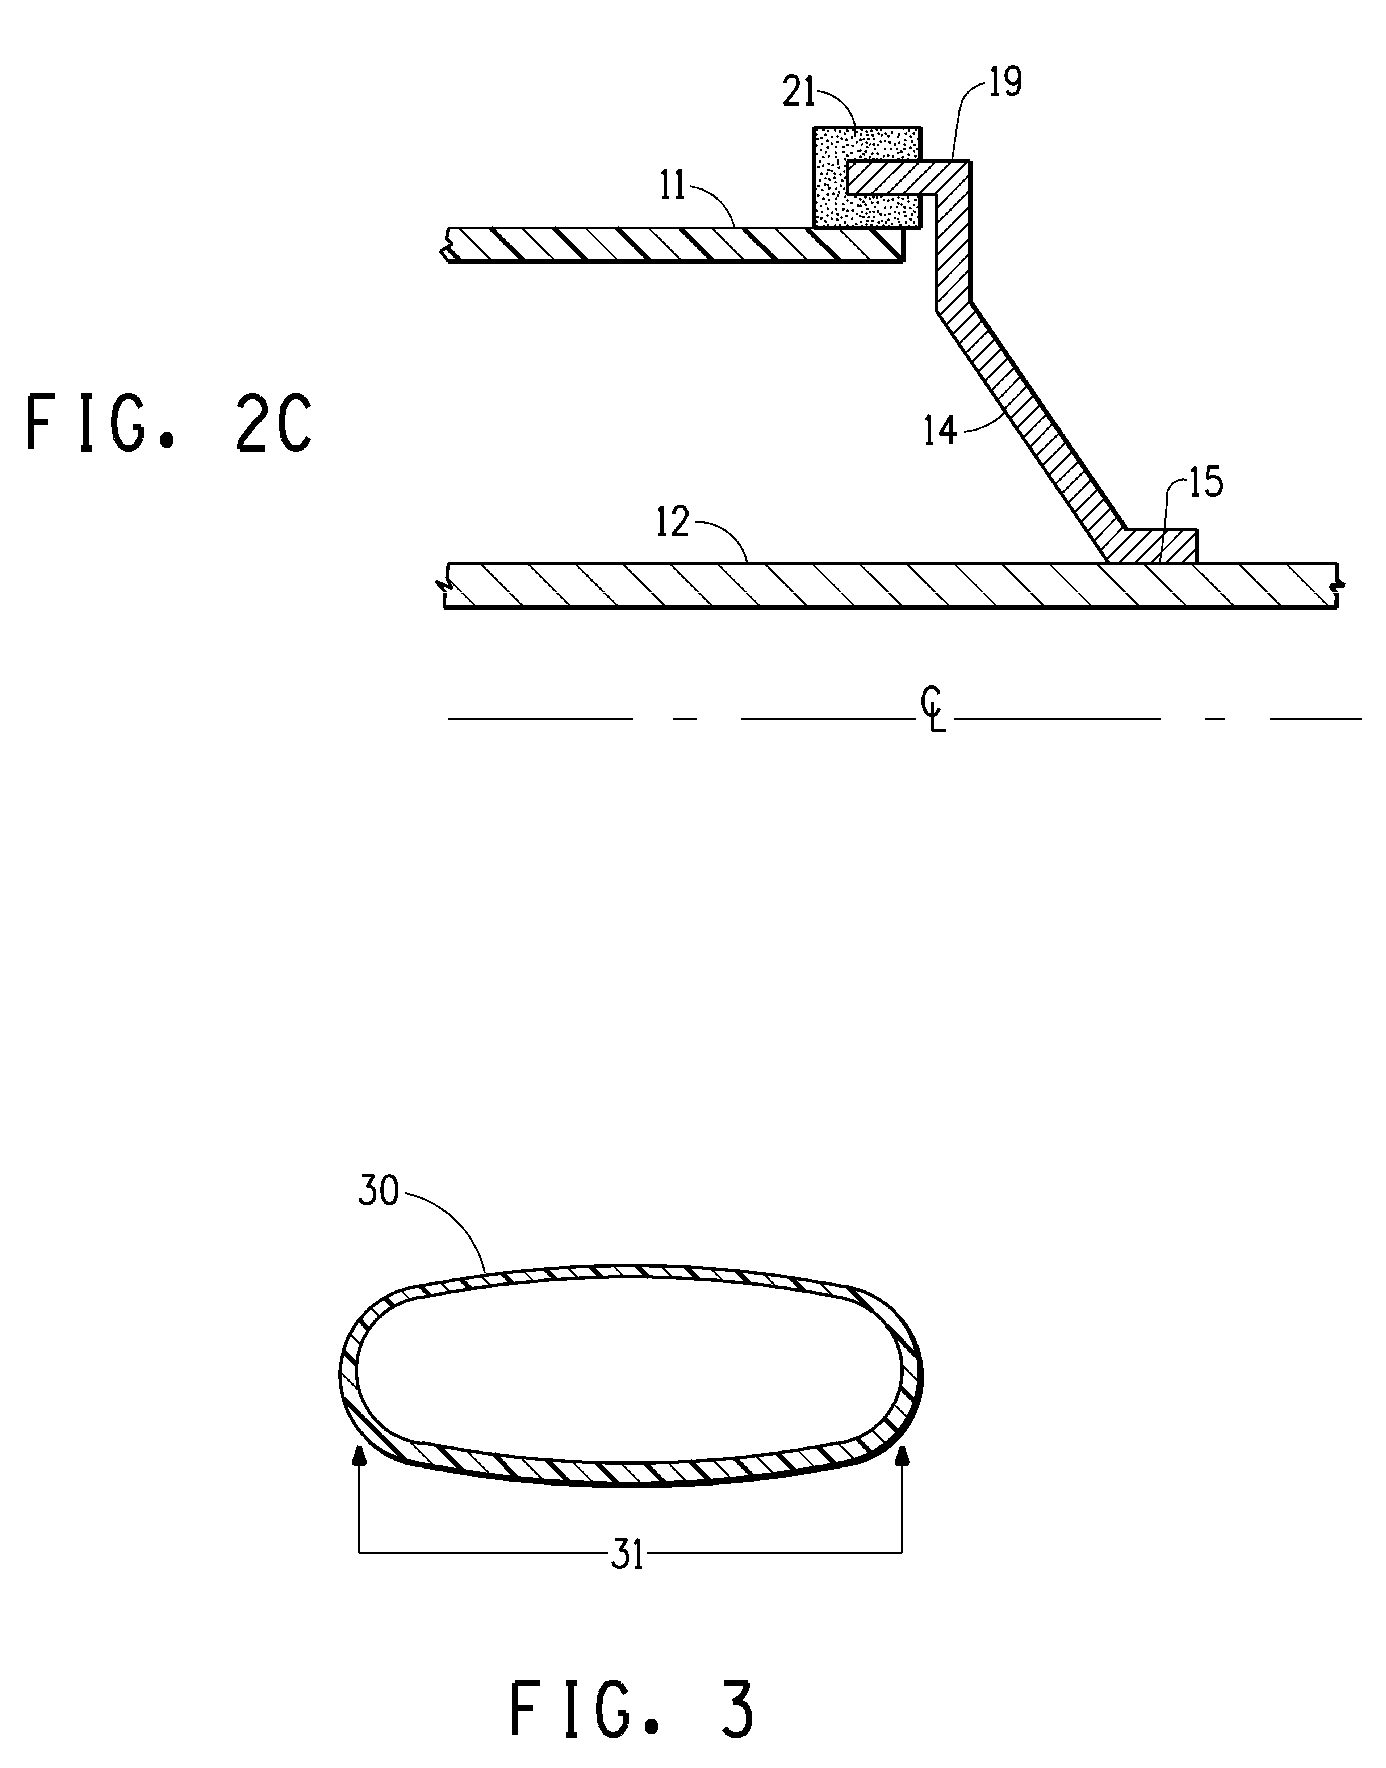 Mufflers with polymeric bodies and process for manufacturing same